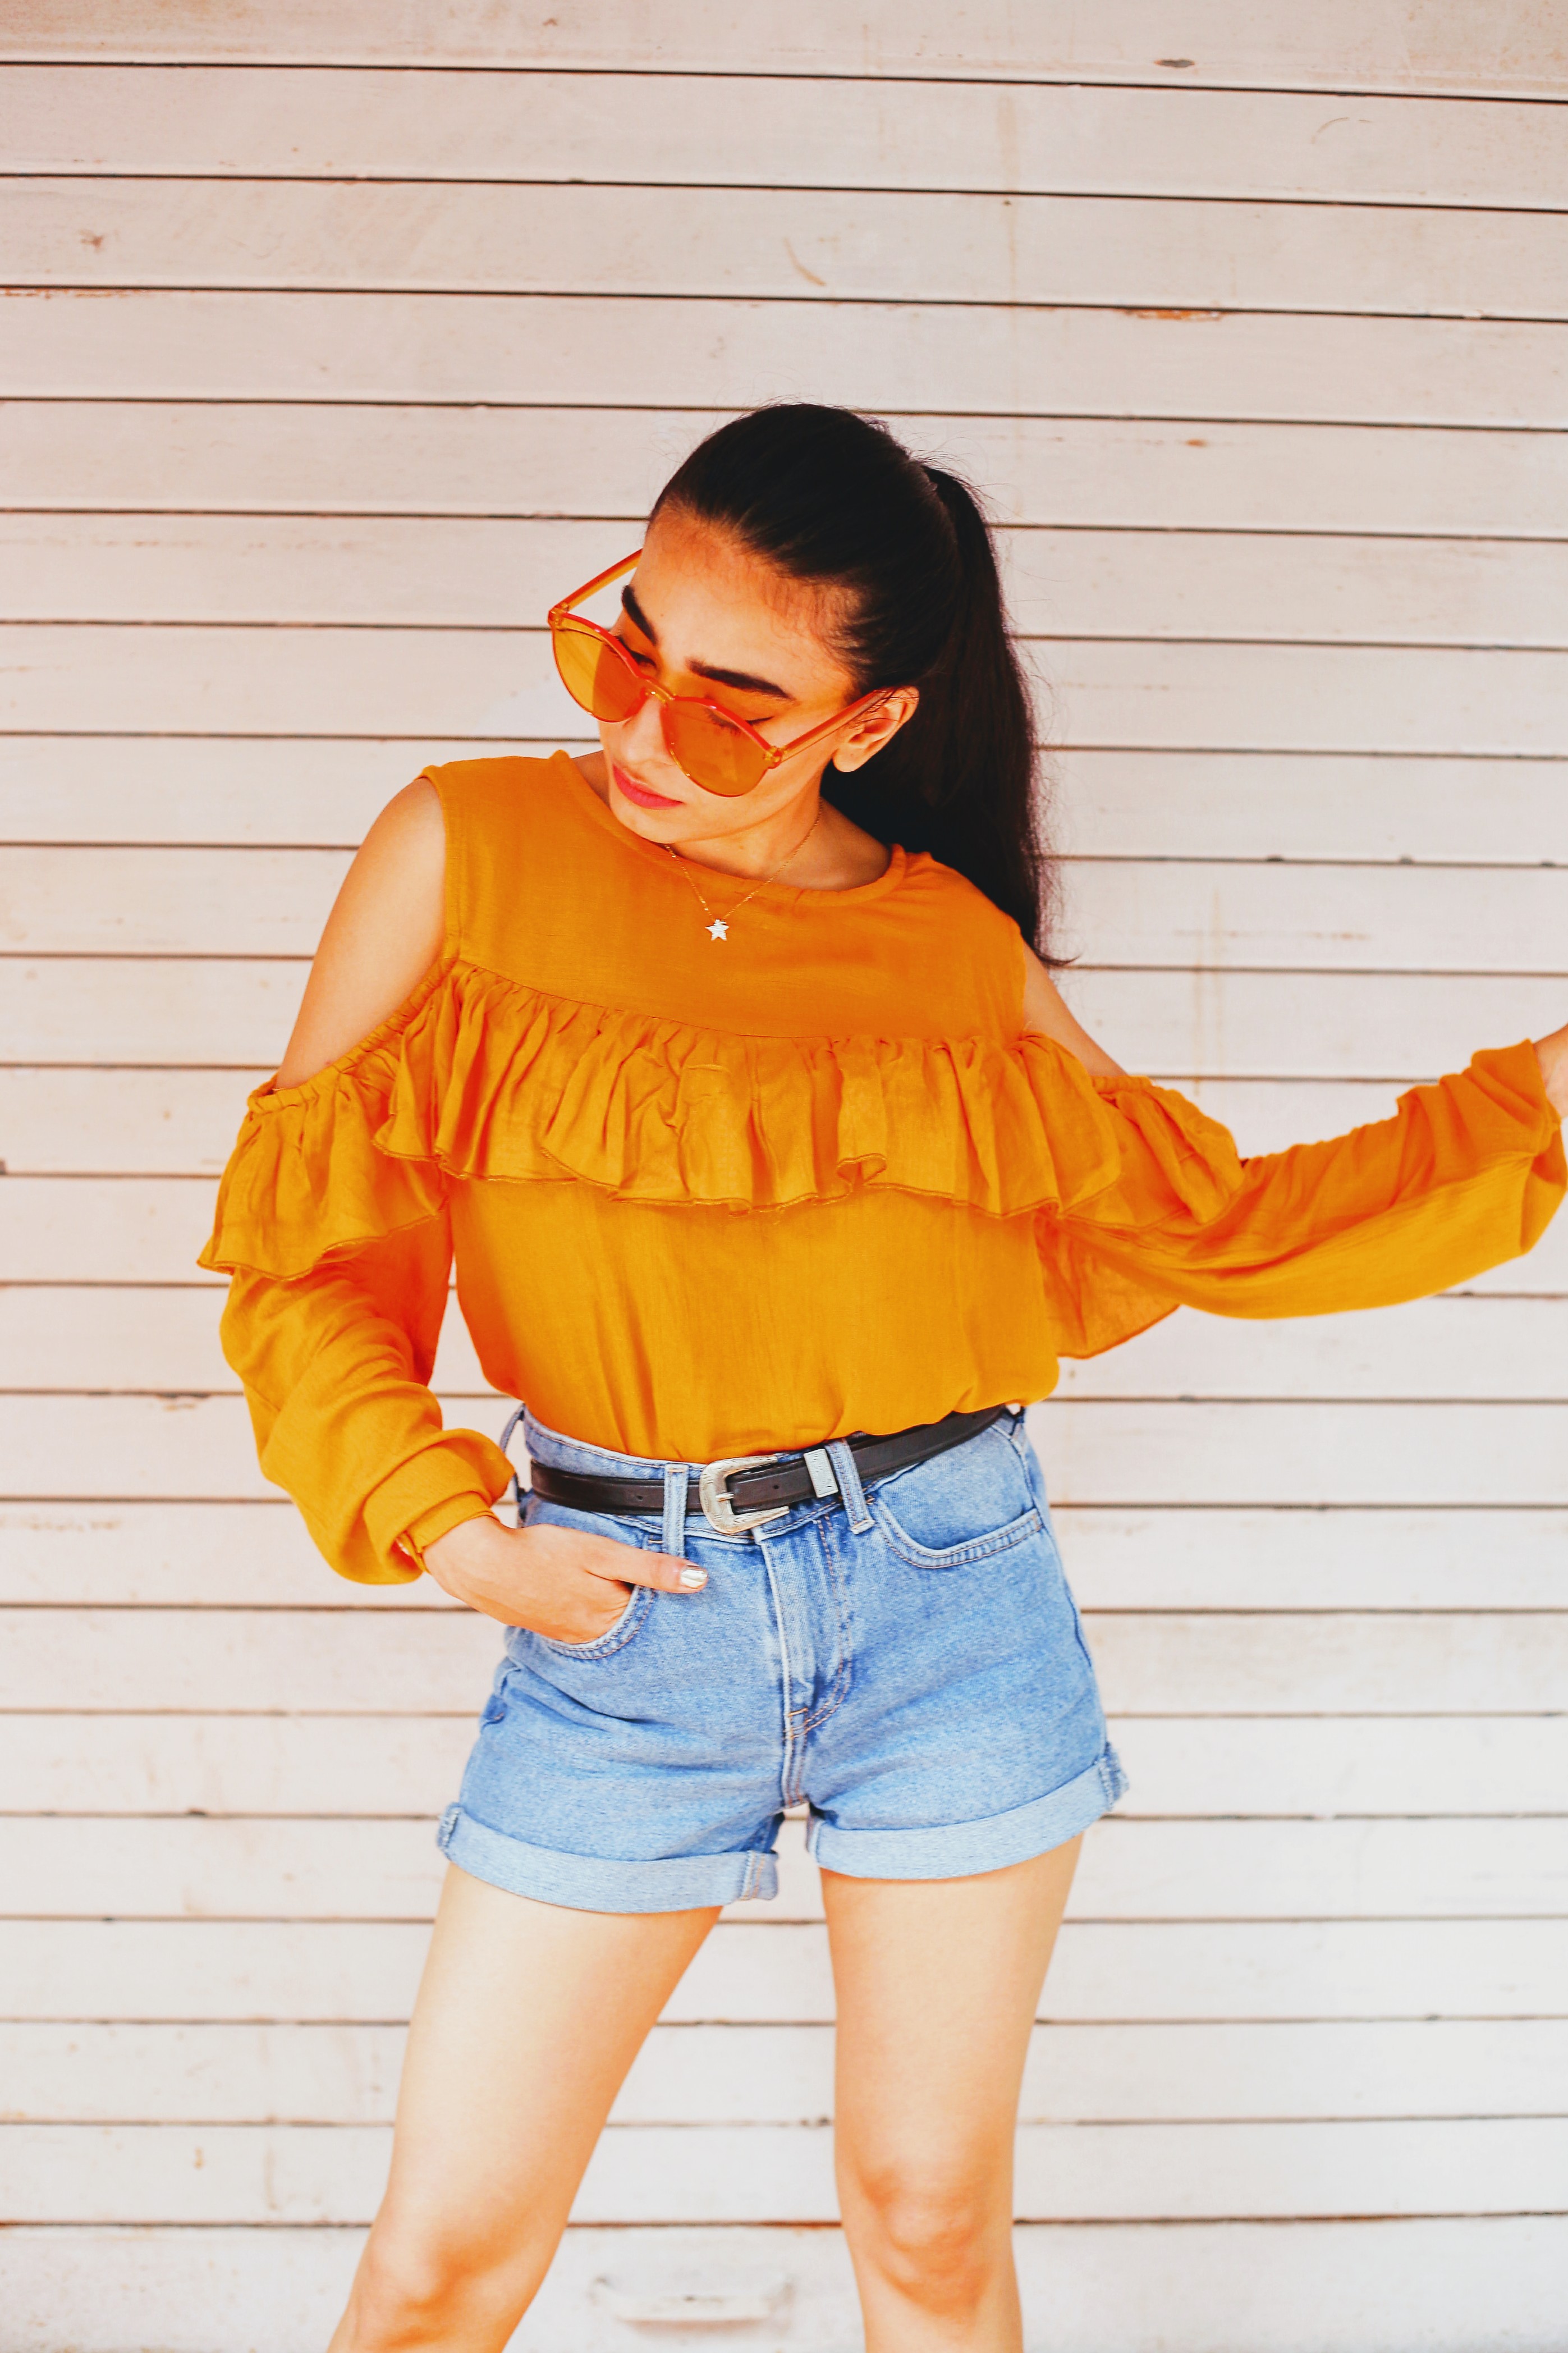 candy sunglasses, yellow shades, yellow sunnies, bellofox sunglasses, yellow fever, mustard top, casual street style, indian fashion blogger, street style, denim shorts, shorts style, how to wear yellow